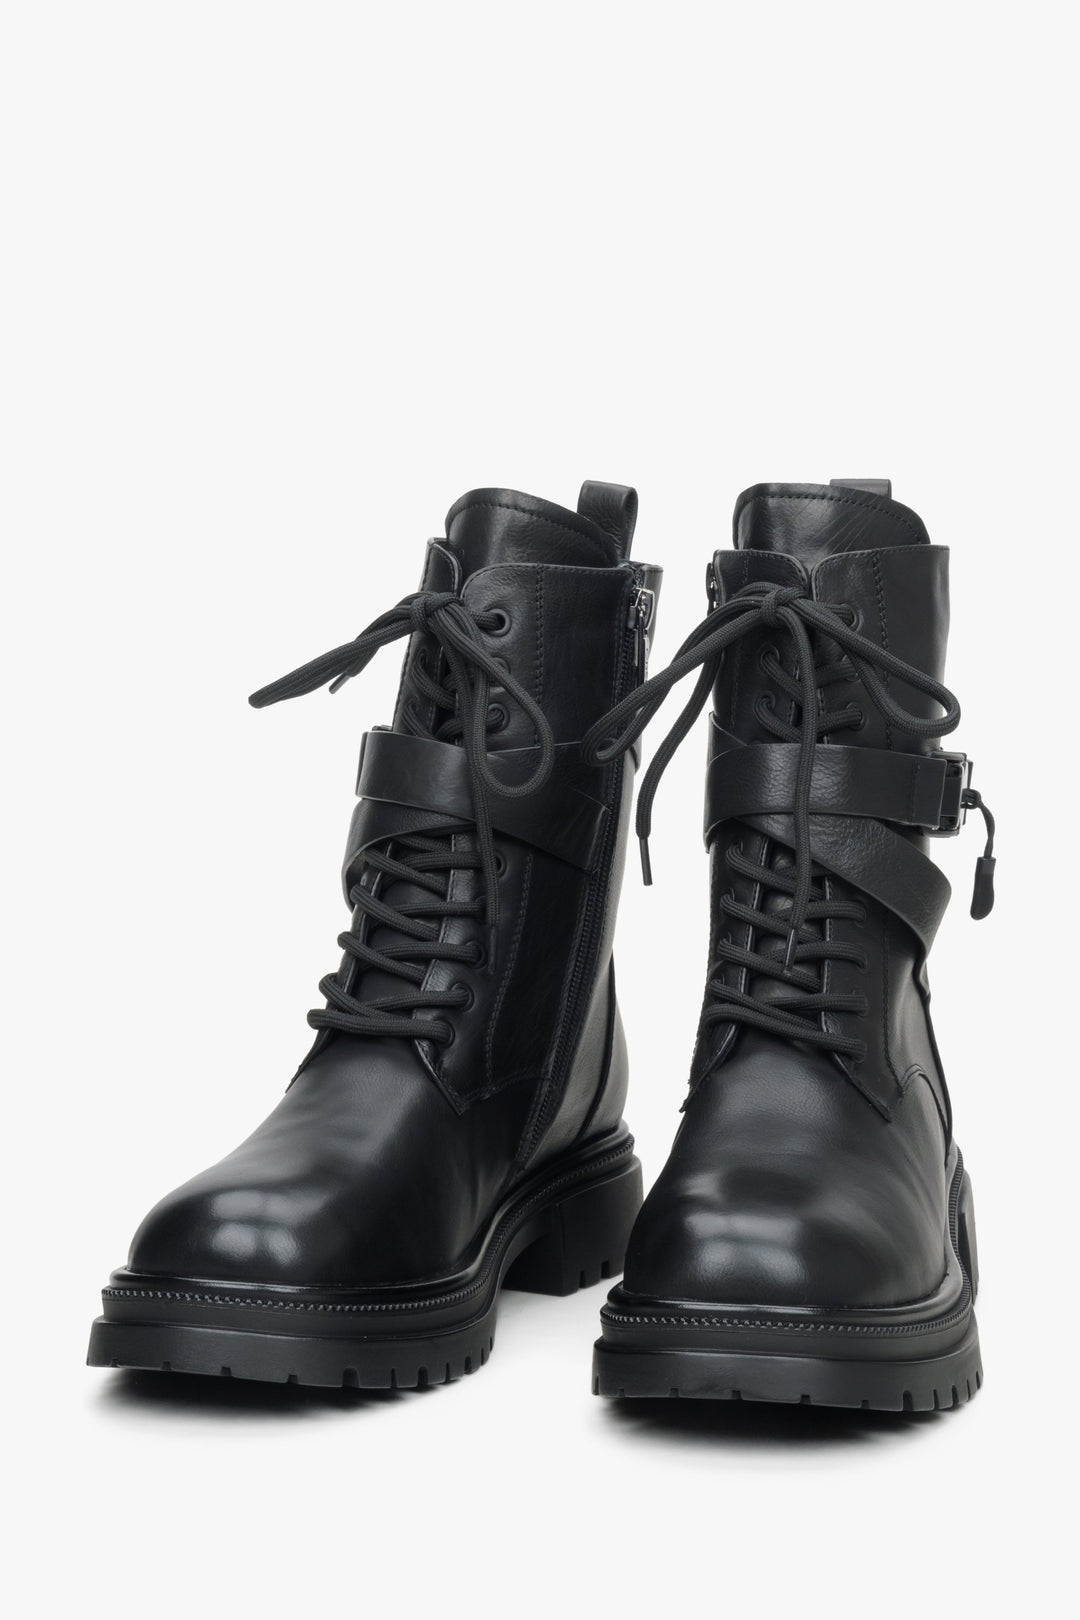 Women's black leather  boots by Estro with winter insulation - presentation of the toe caps.